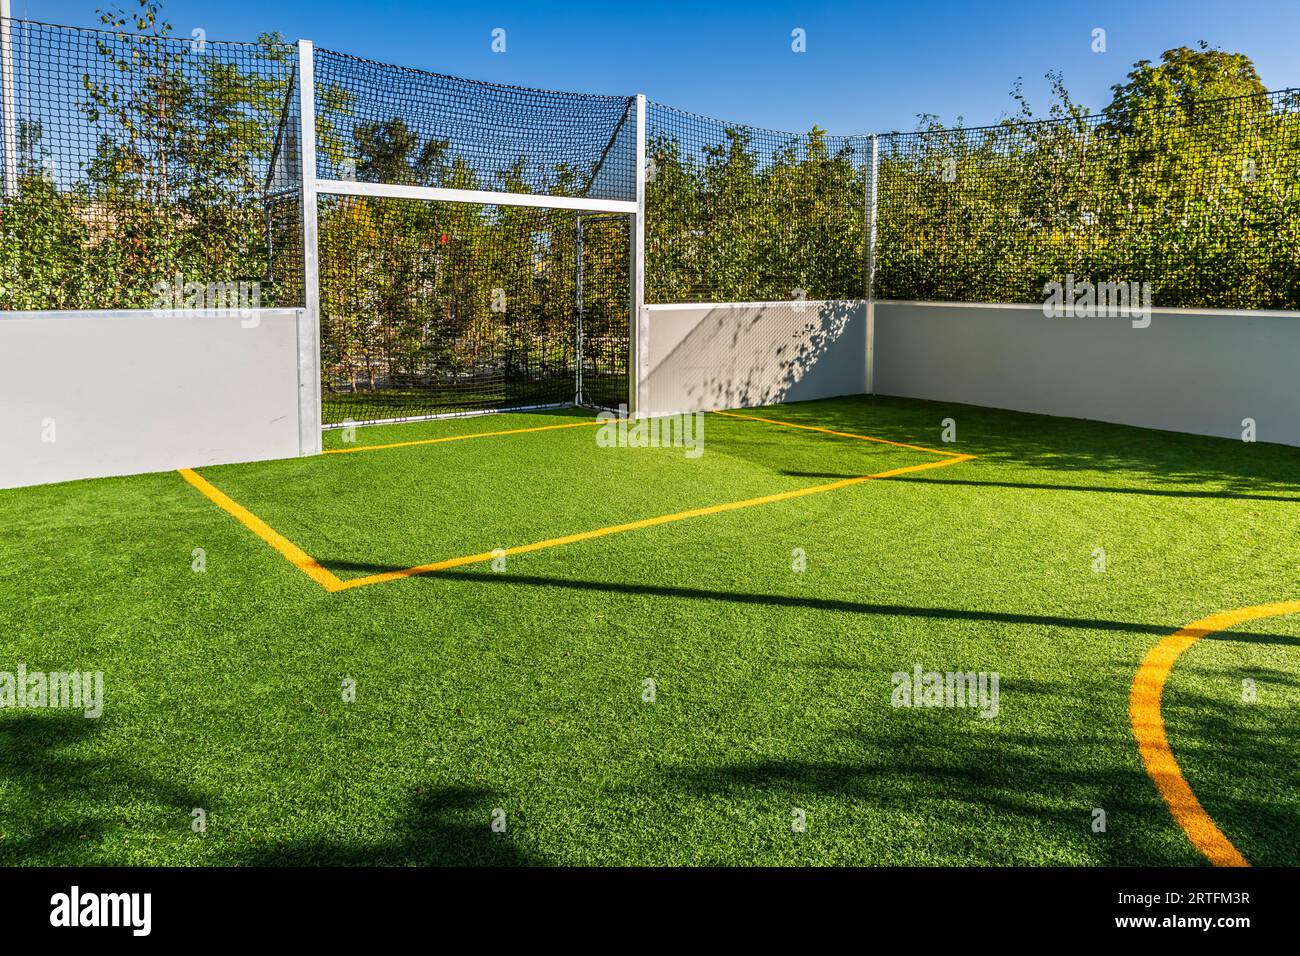 Playing field for small garden with artificial lawn, synthetic turf playing field, artificial grass pitch Stock Photo